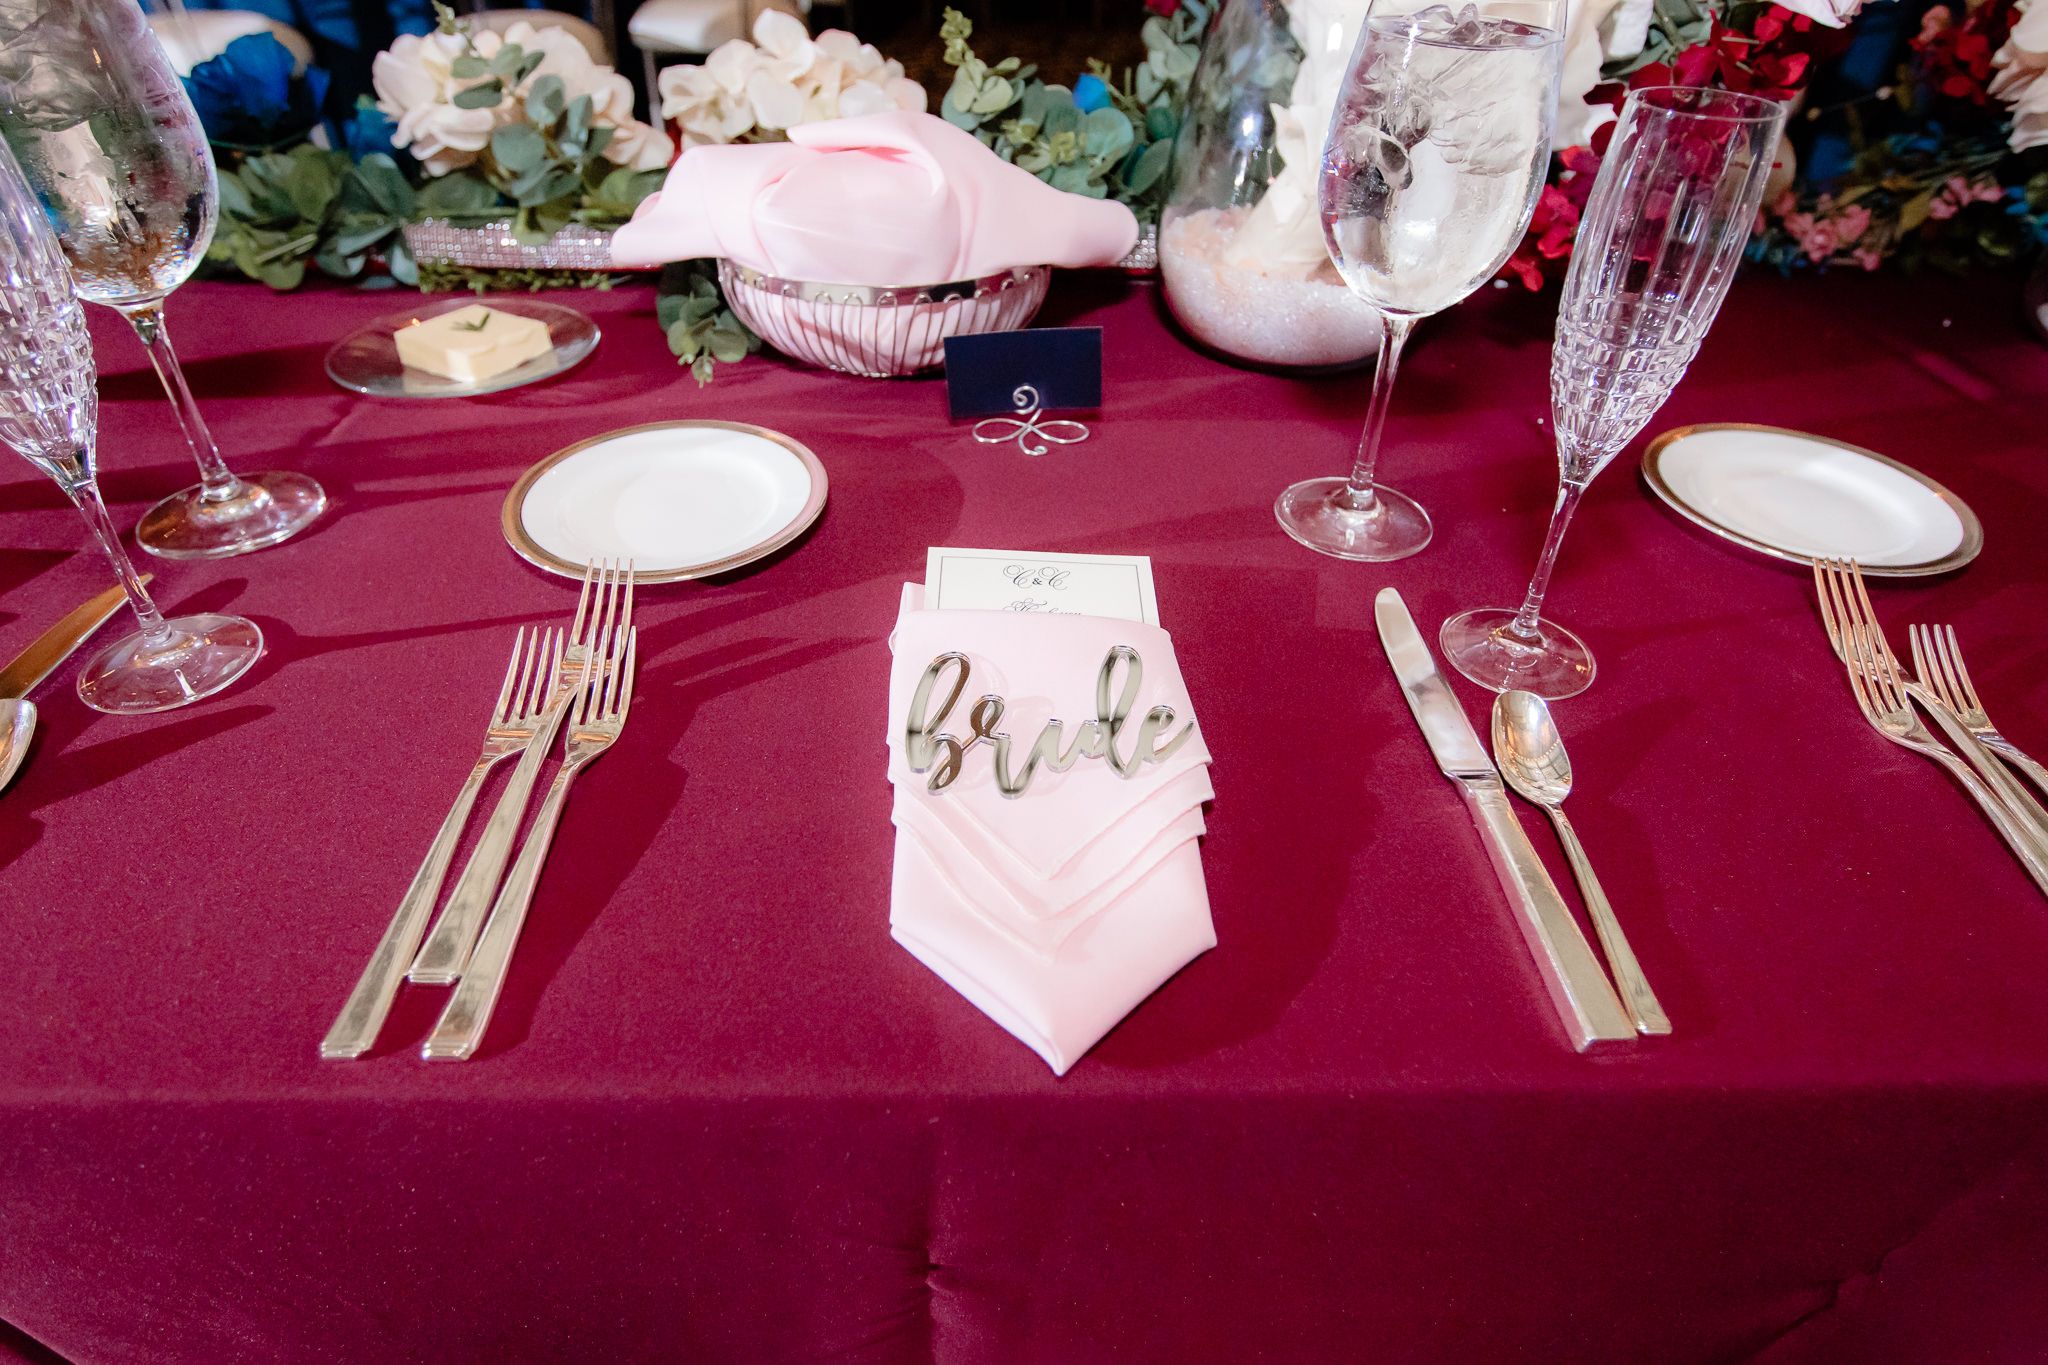 Bridal place setting at the head table at The Pennsylvanian